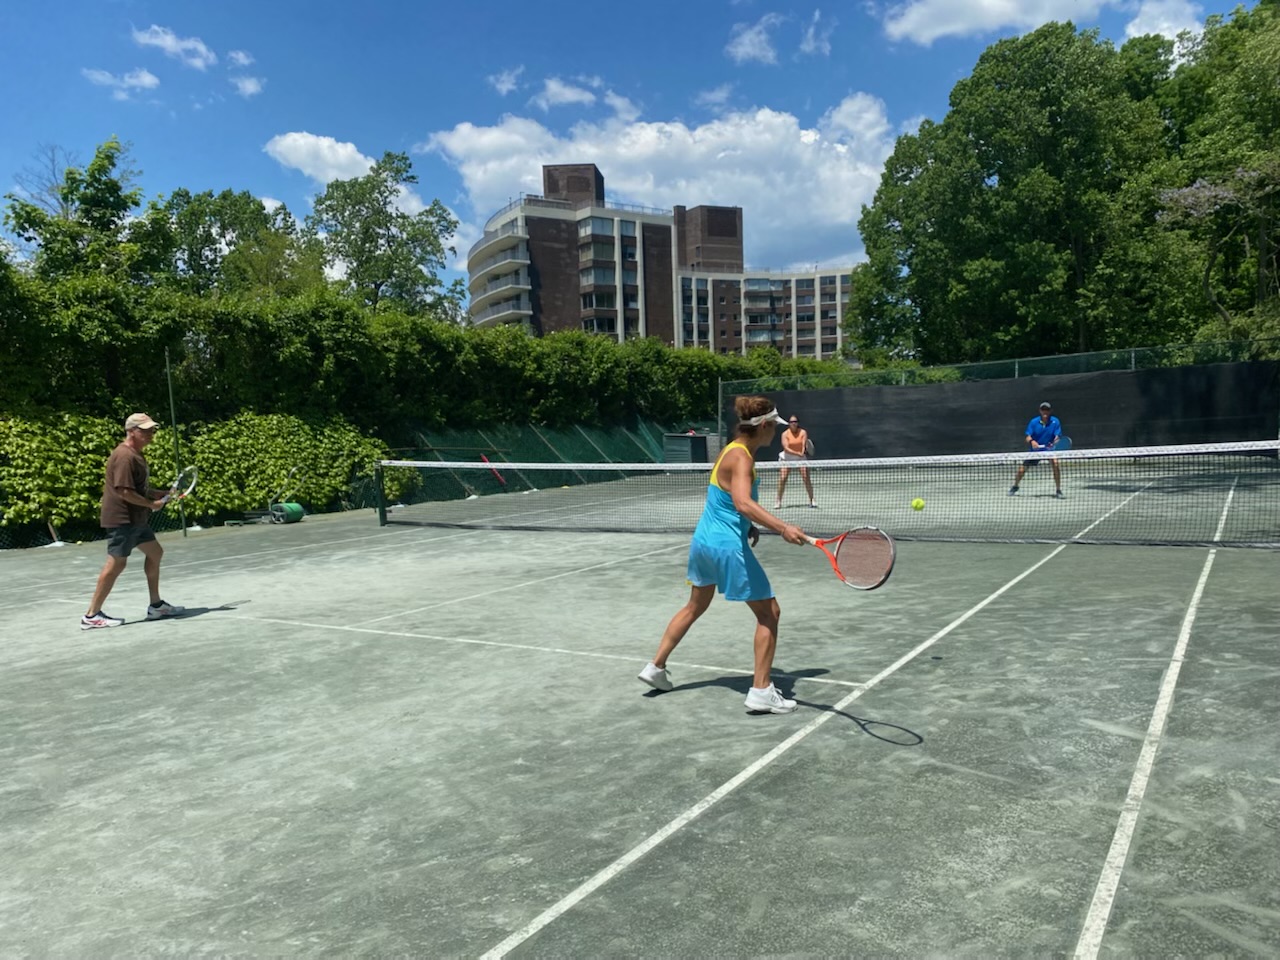 Riverdale Tennis is a private tennis club offering all levels of PTR and USTA certified tennis instruction in Riverdale, NYC.